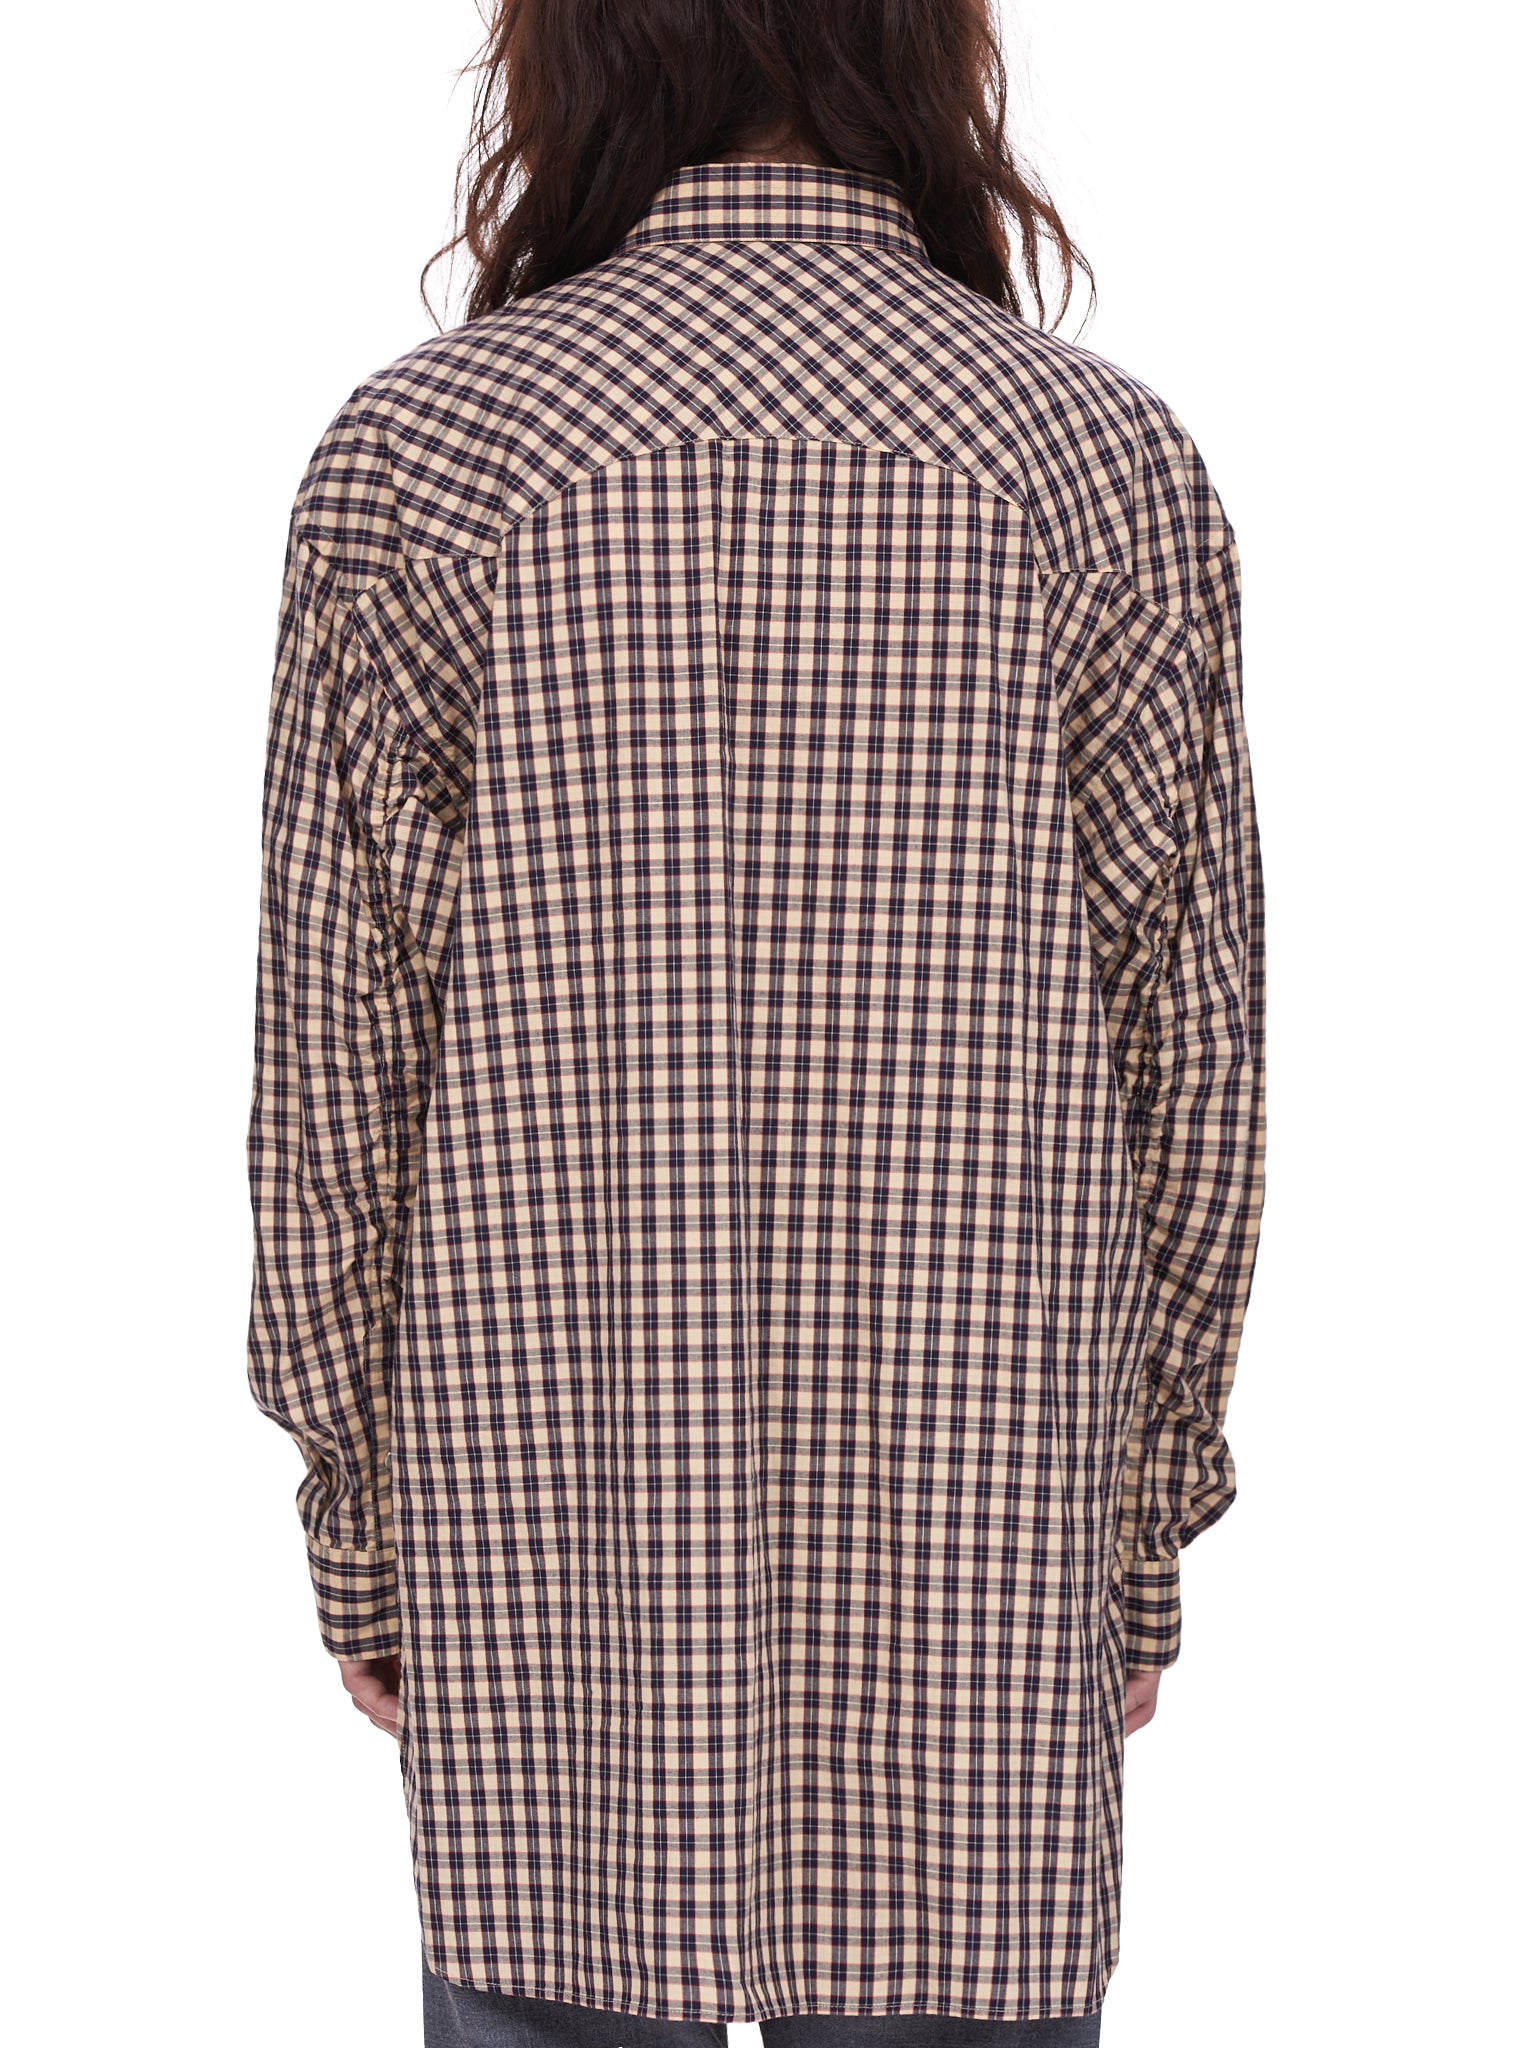 Undercover Plaid Top | H. Lorenzo - back